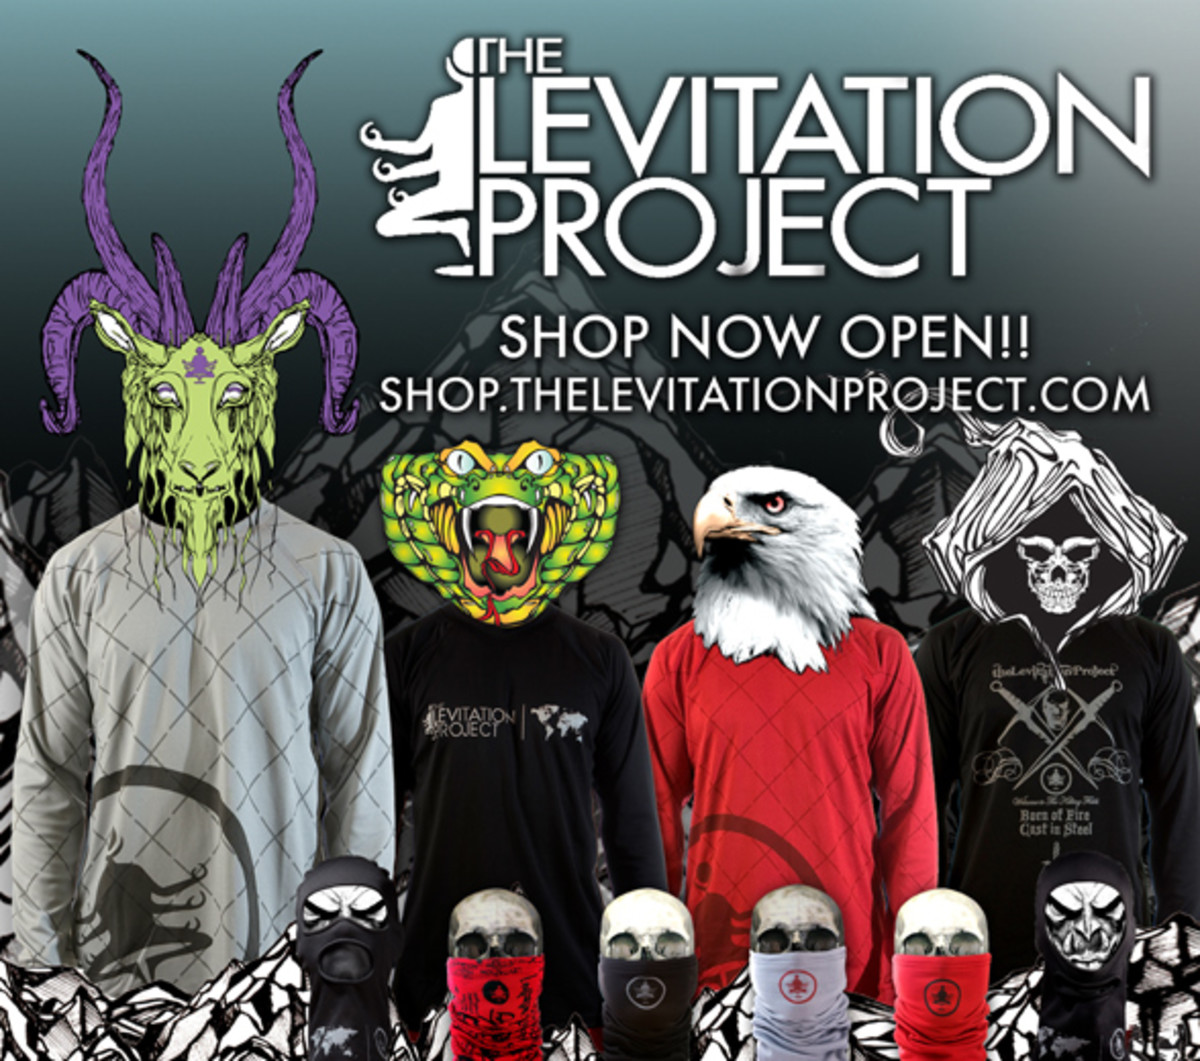 The Levitation Project Opens Online Store - Snowboarder